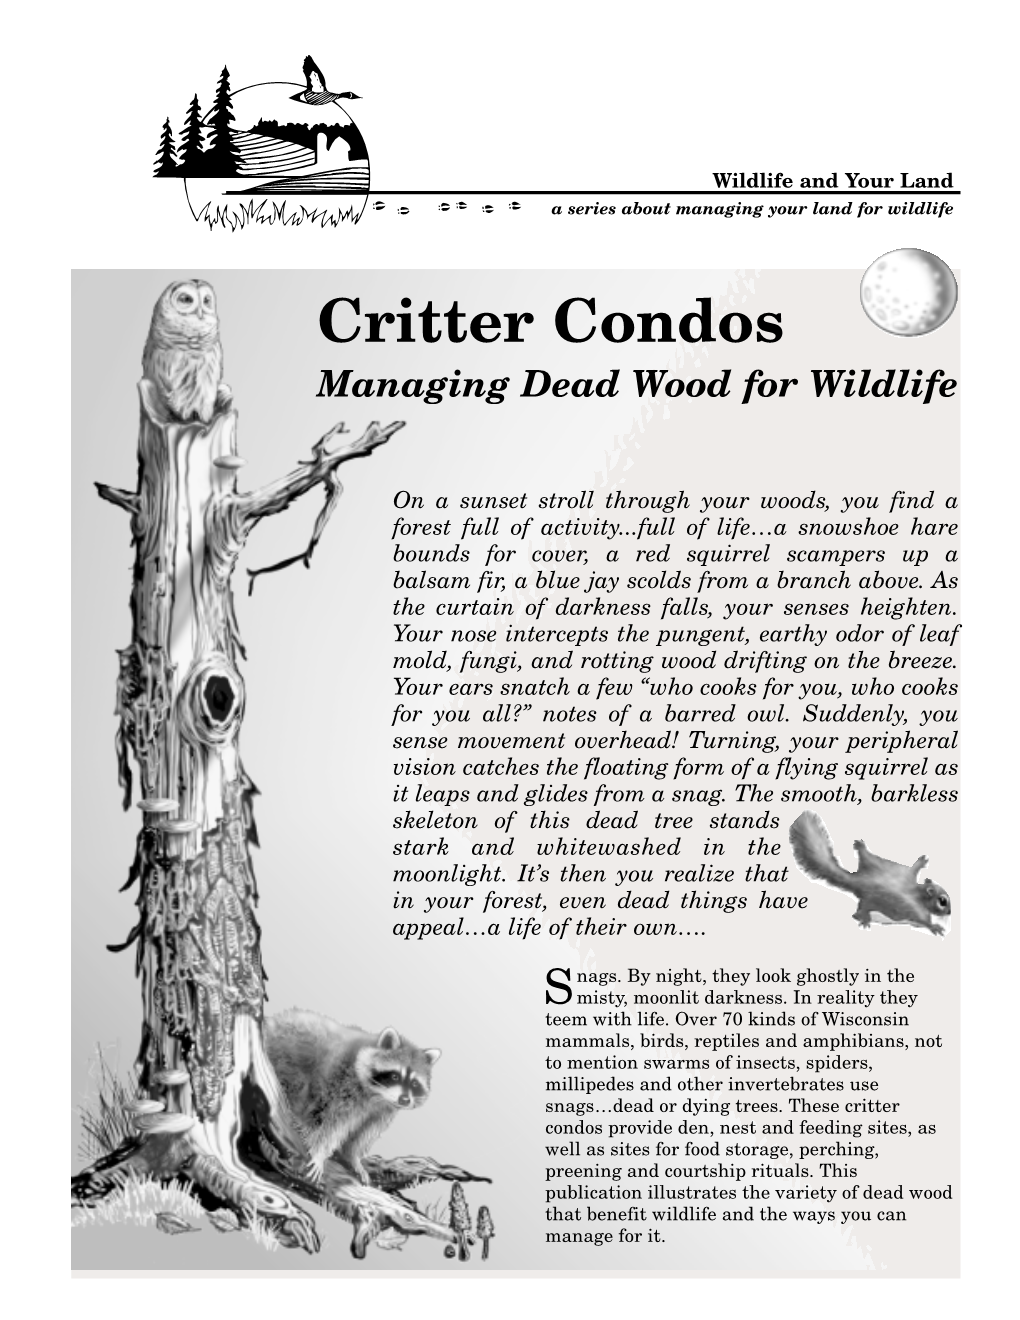 Critter Condos Managing Dead Wood for Wildlife